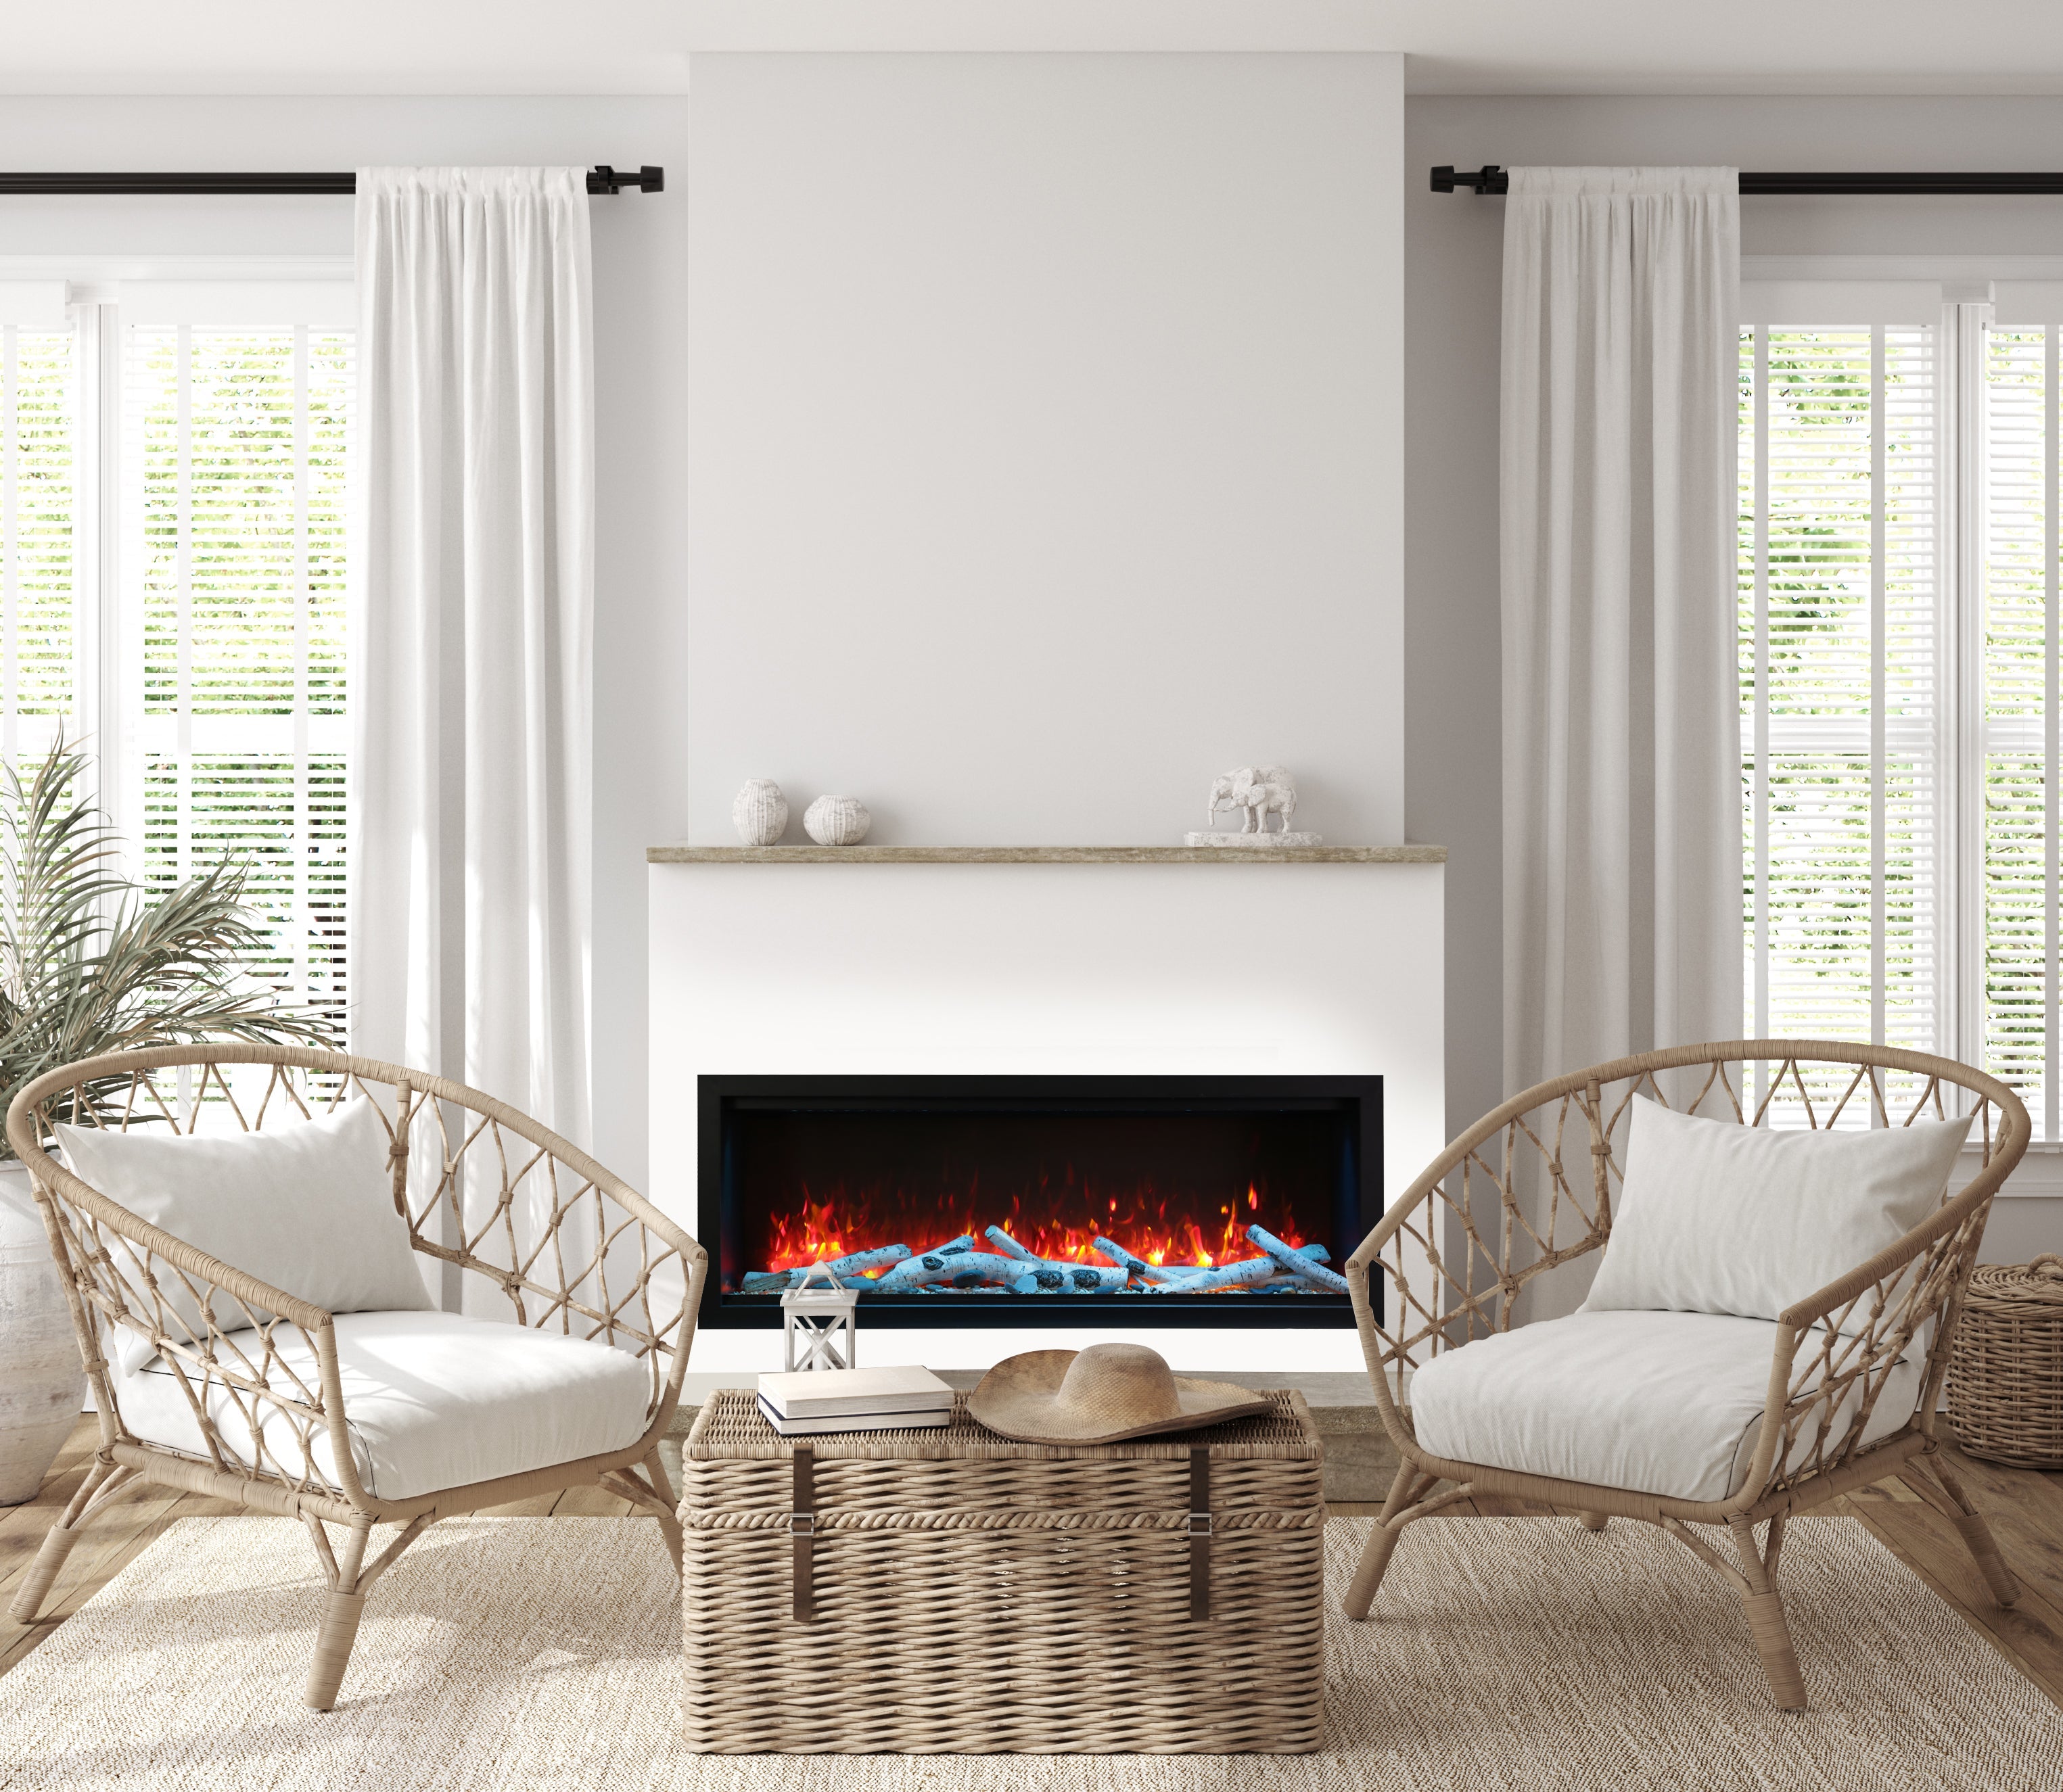 Amantii 60" Symmetry 3.0 Built-in Smart WiFi Electric Fireplace -SYM-60- Lifestyle Living Room With Concrete Fireplace